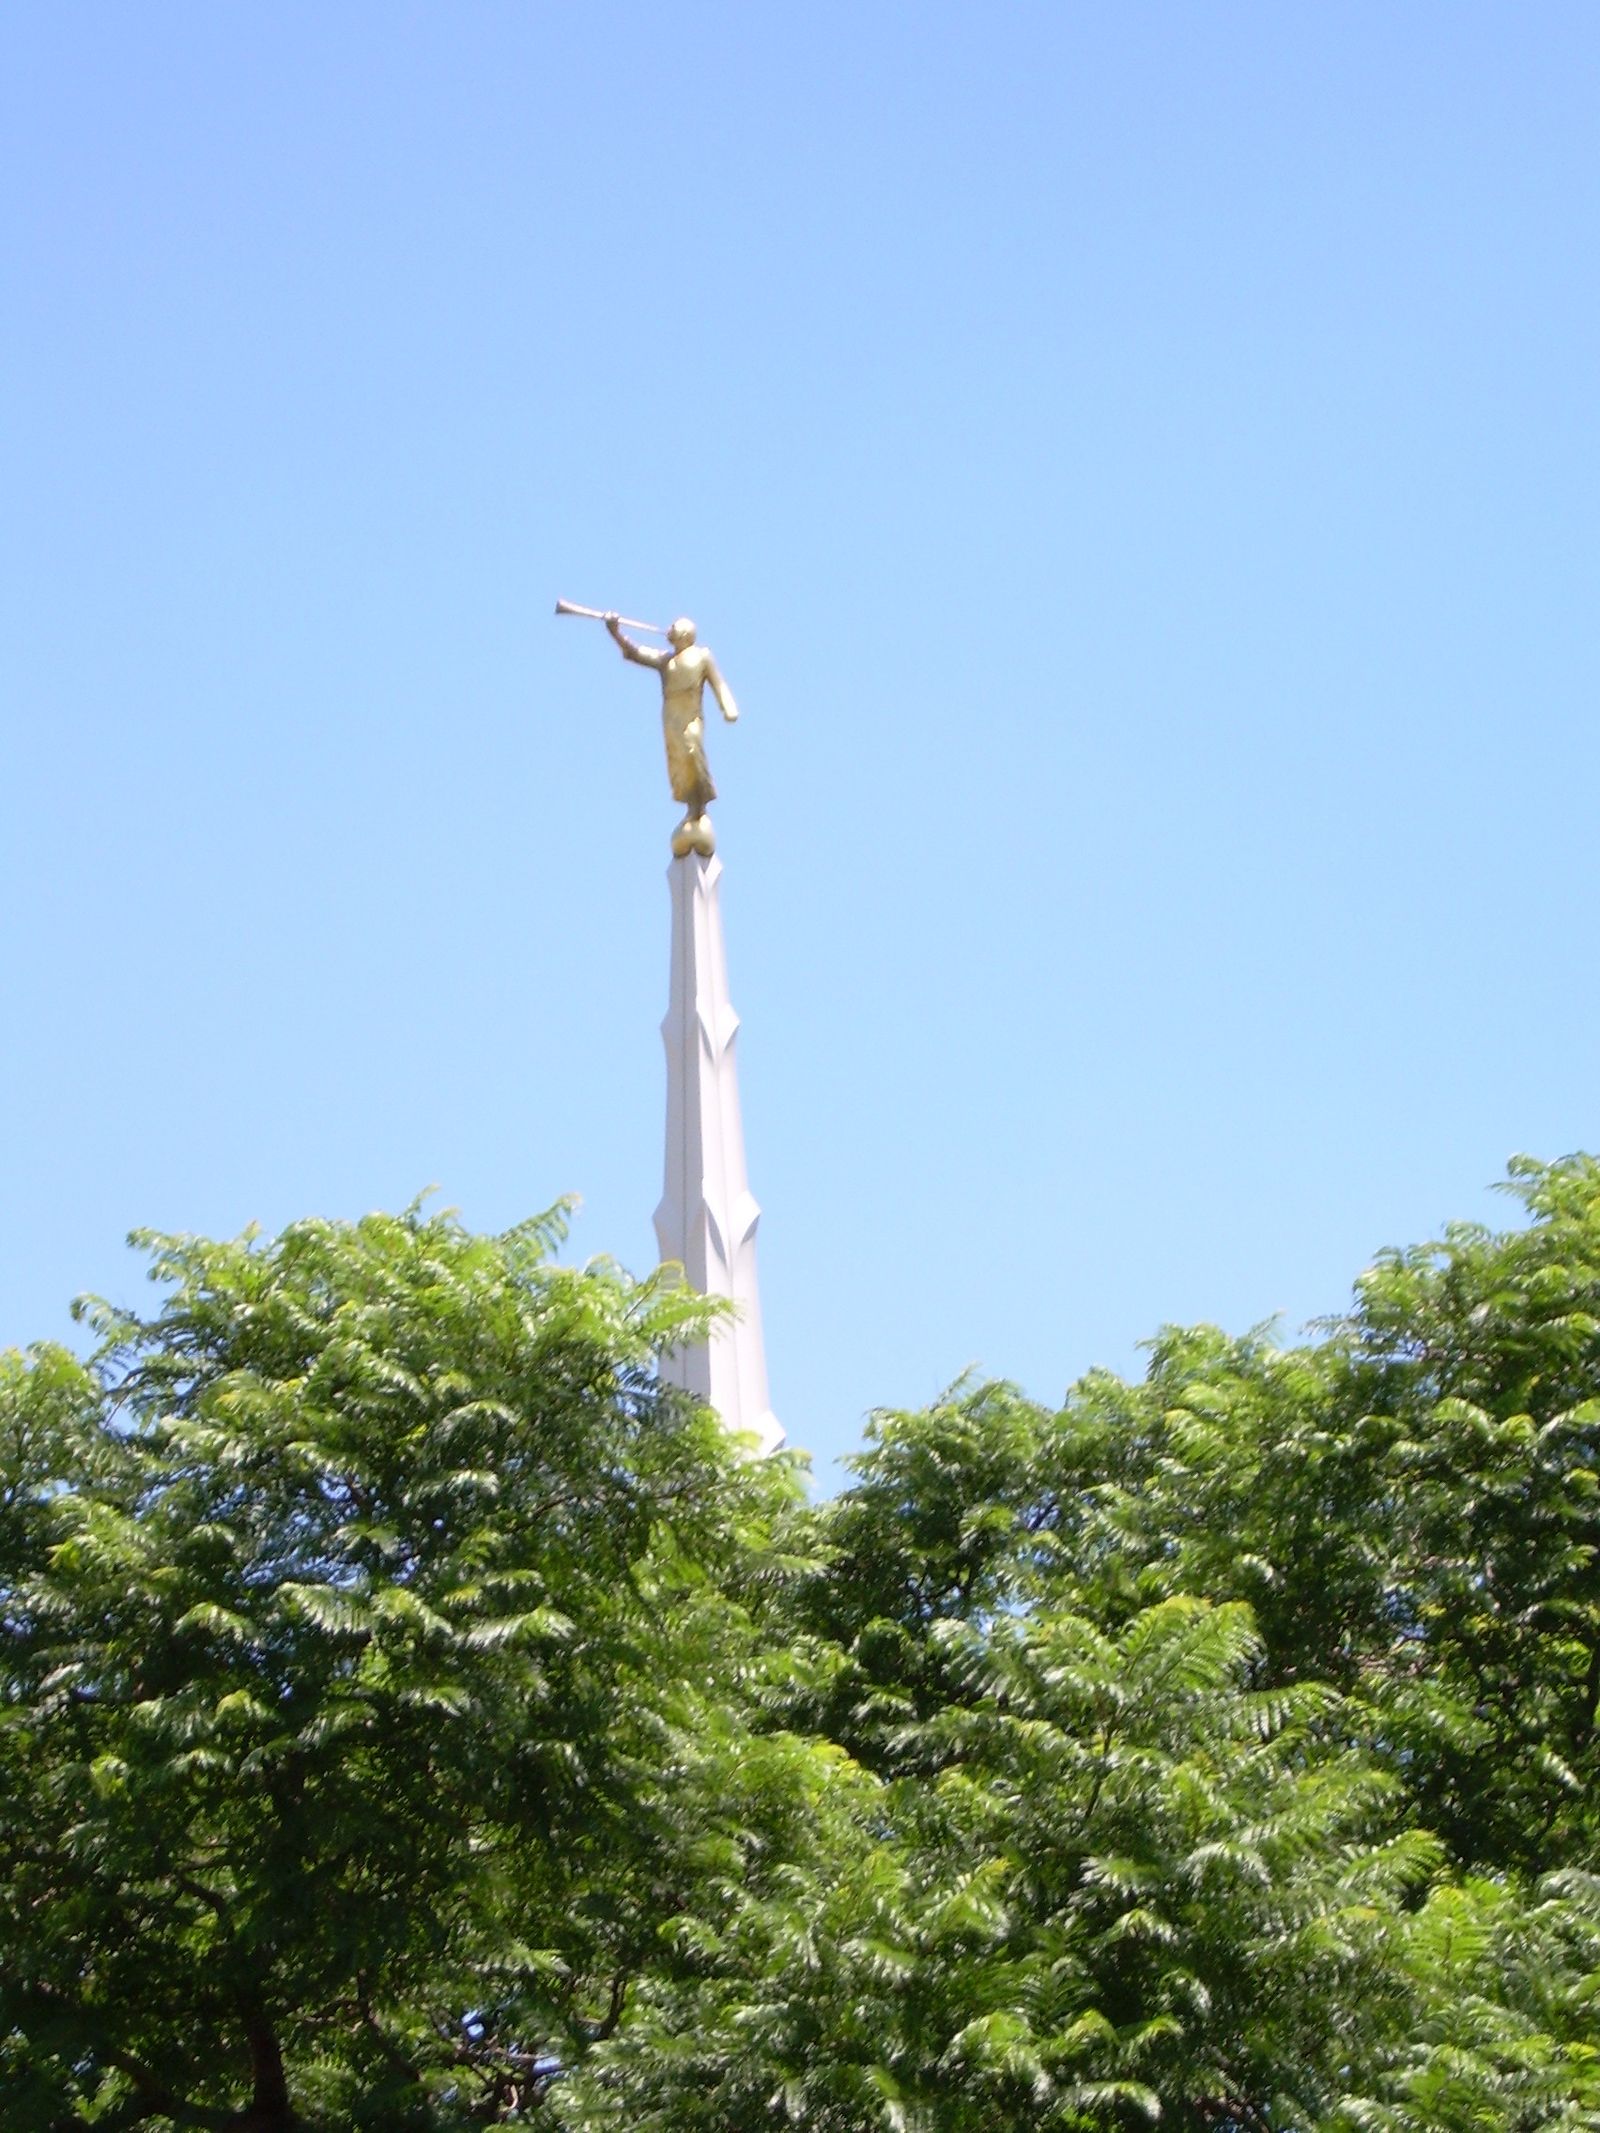 The Johannesburg South Africa Temple spire, including trees.